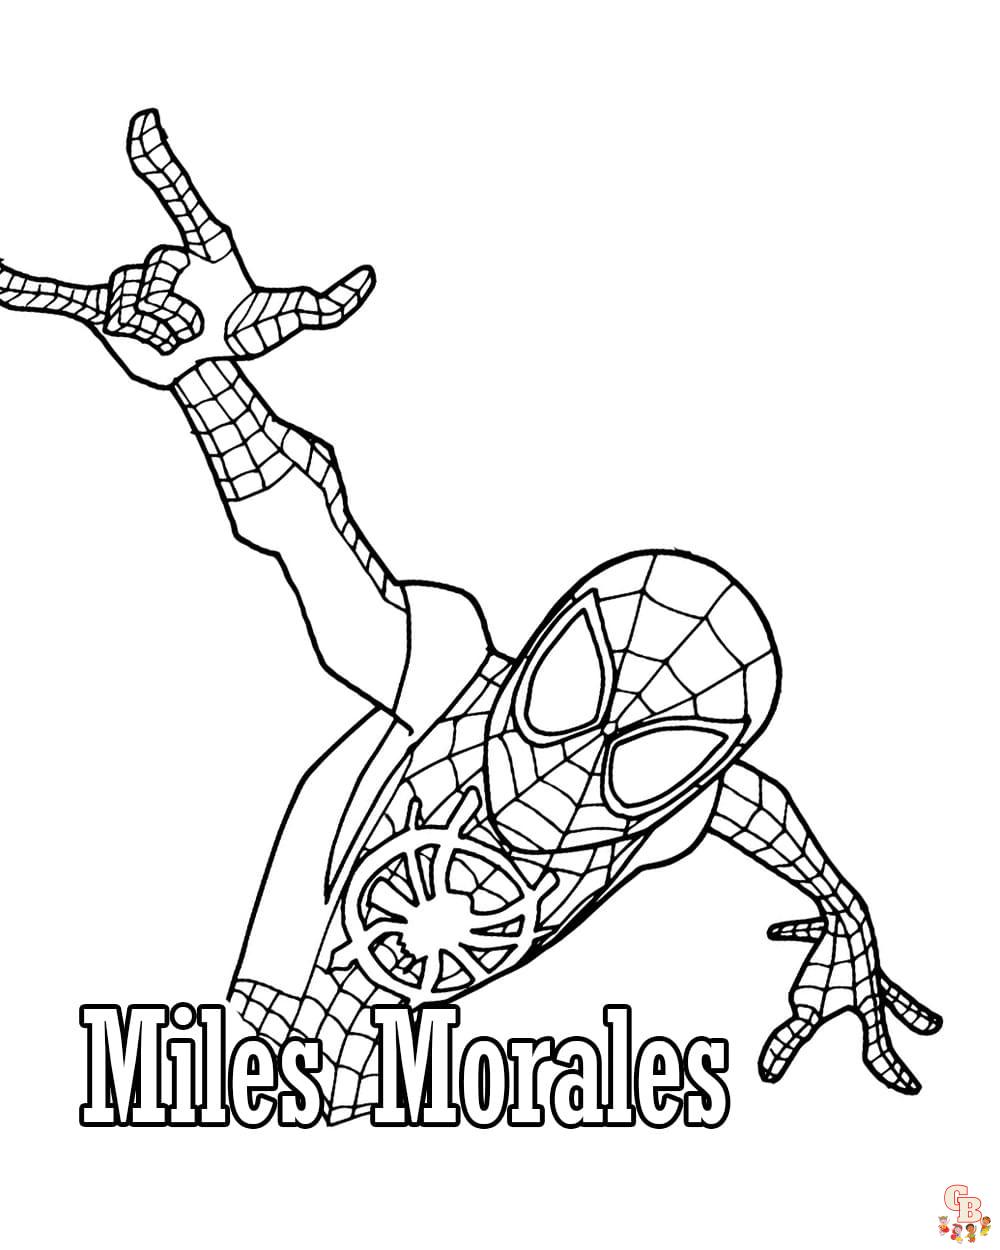 Enjoy coloring miles morales pages with website